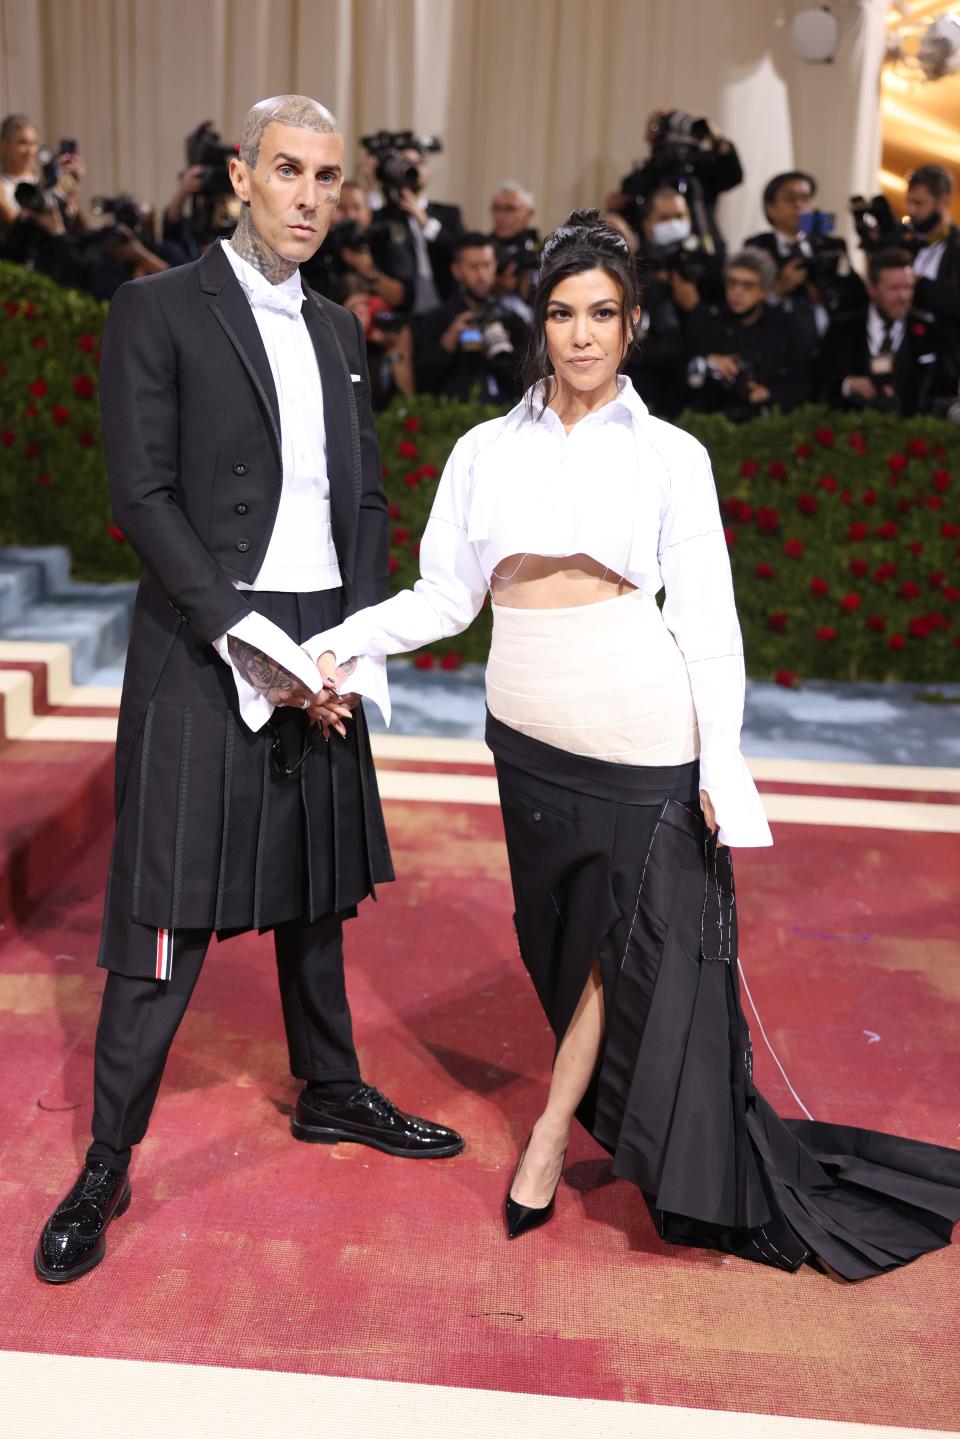 Travis Barker and Kourtney Kardashian attend the 2022 Met Gala. Travis wears a black suit with a skirt over his pants. Kourtney wears a cropped white button down and a skirt made of deconstructed meanswear.